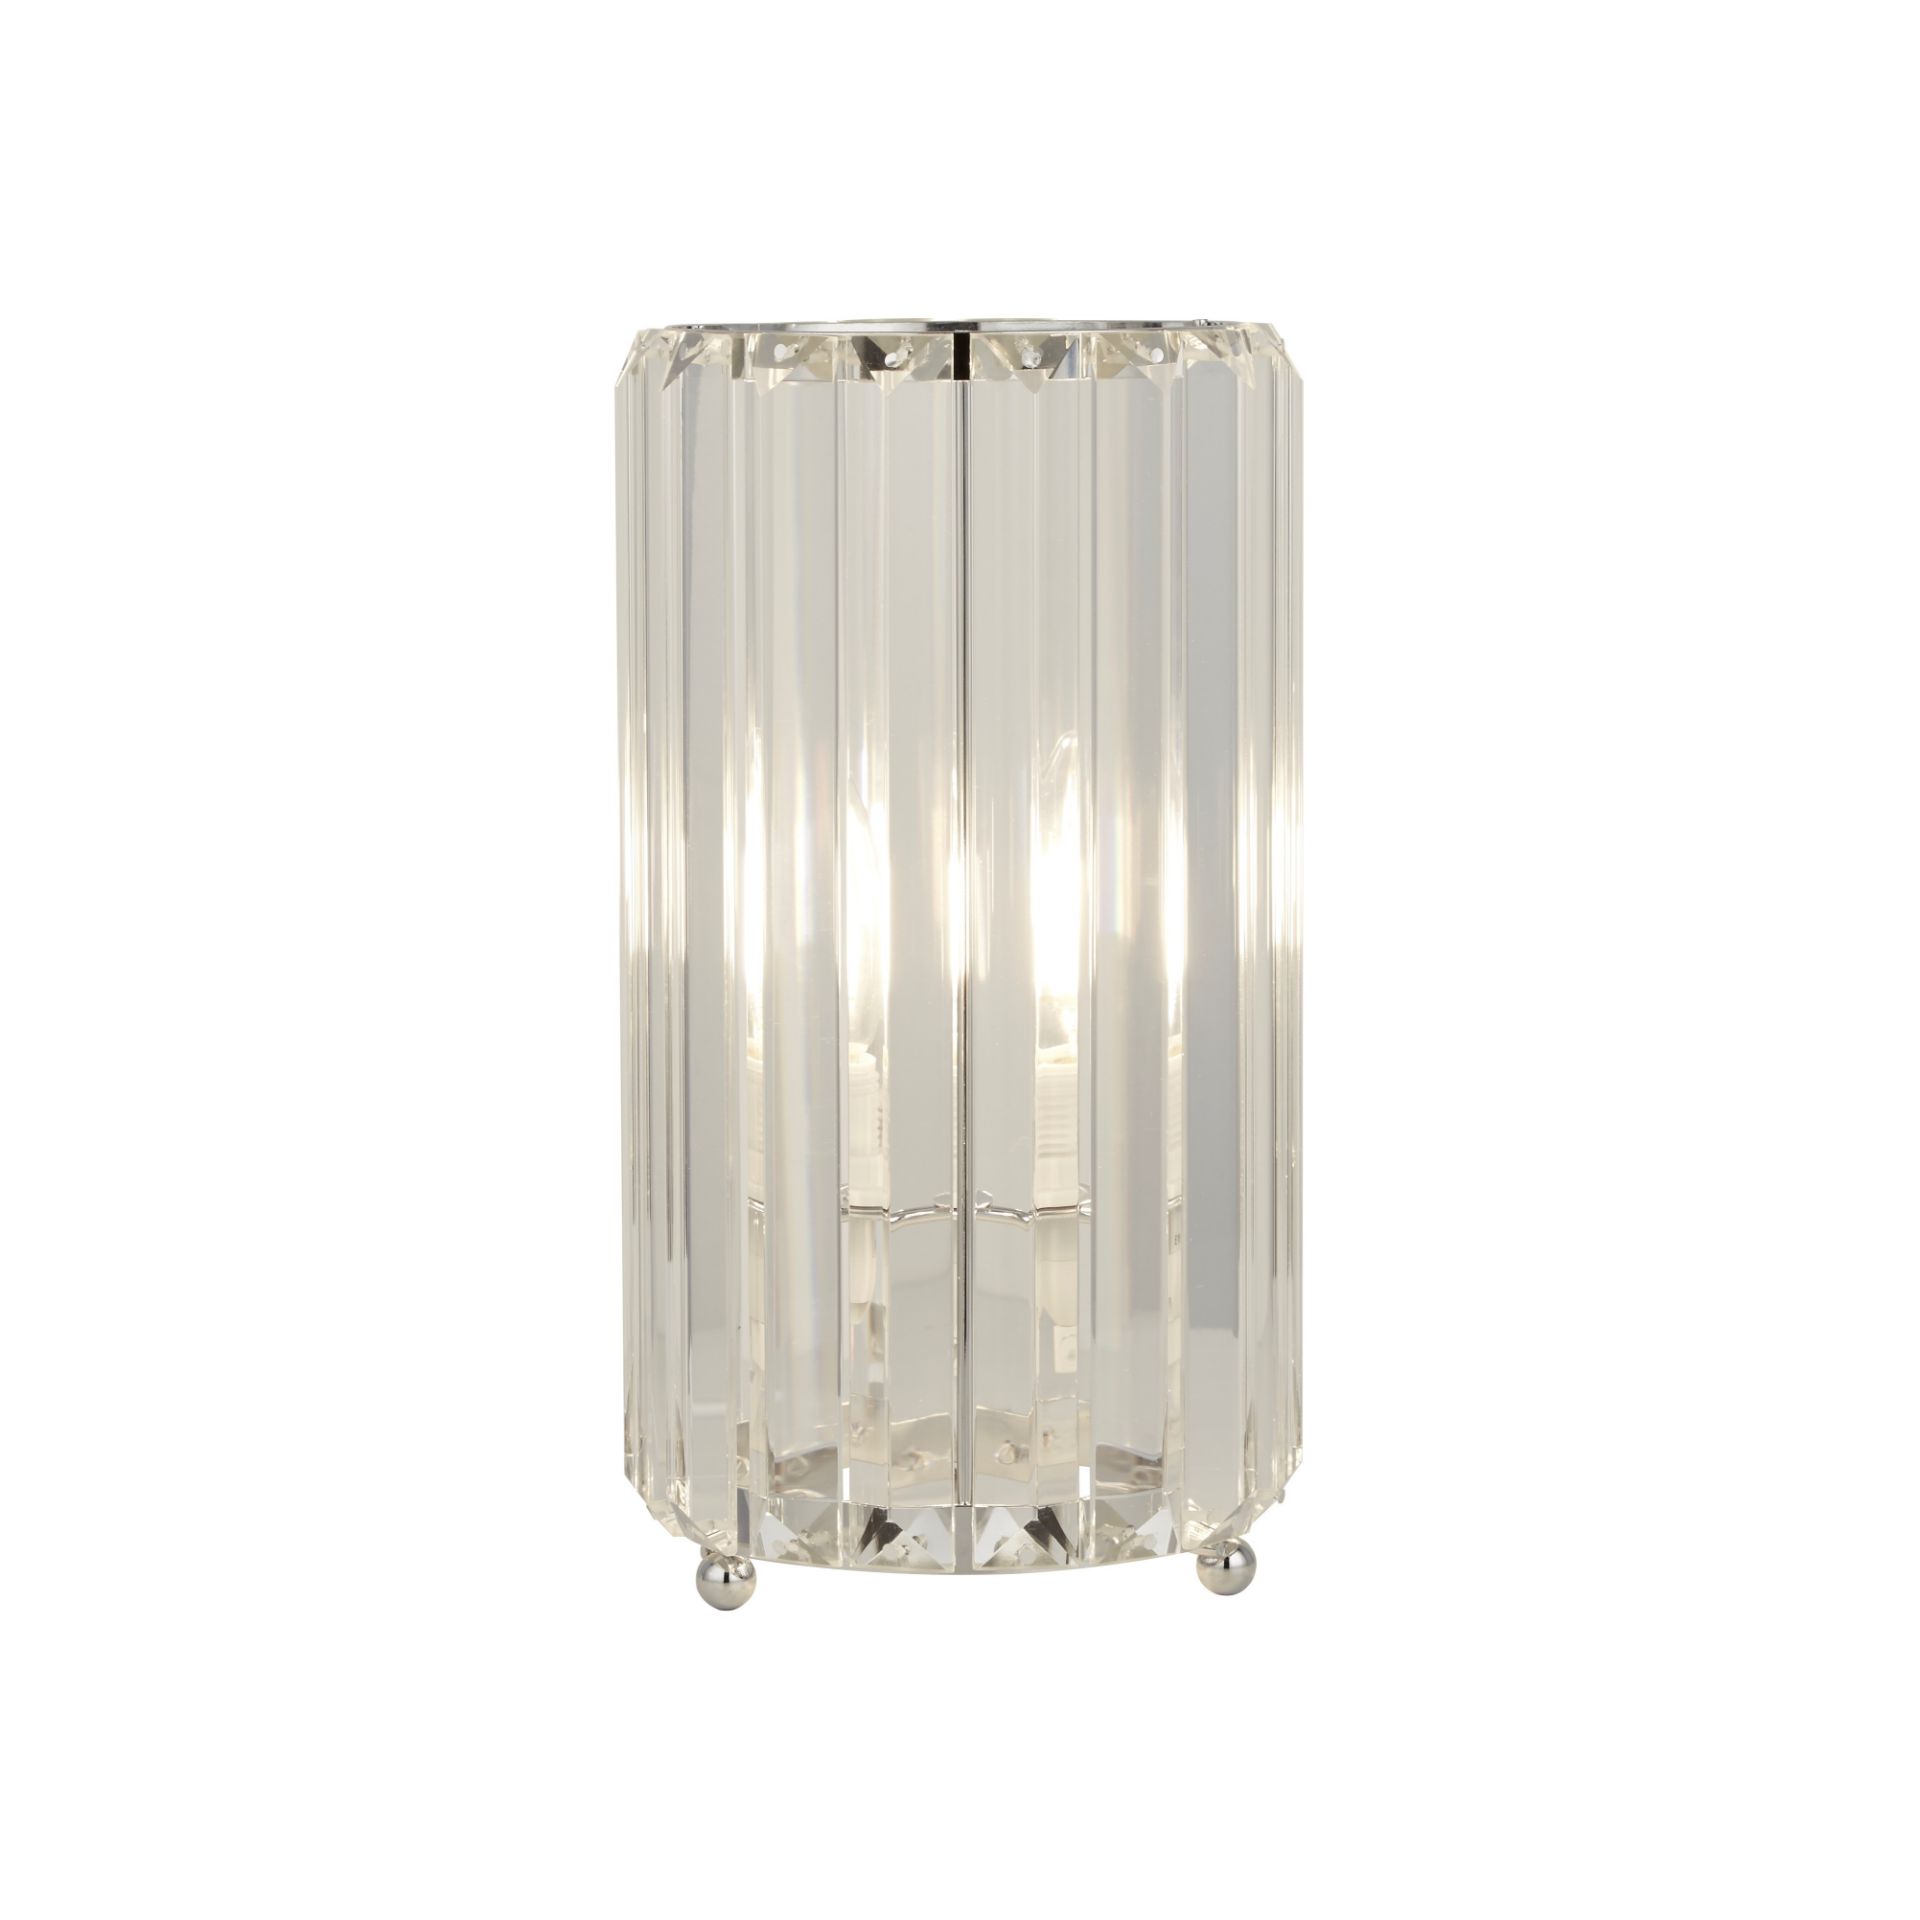 CLEAR TABLE LAMP 26.5CM HIGH, 7W. Stylish table lamp with clear prisms and chrome details. 26.